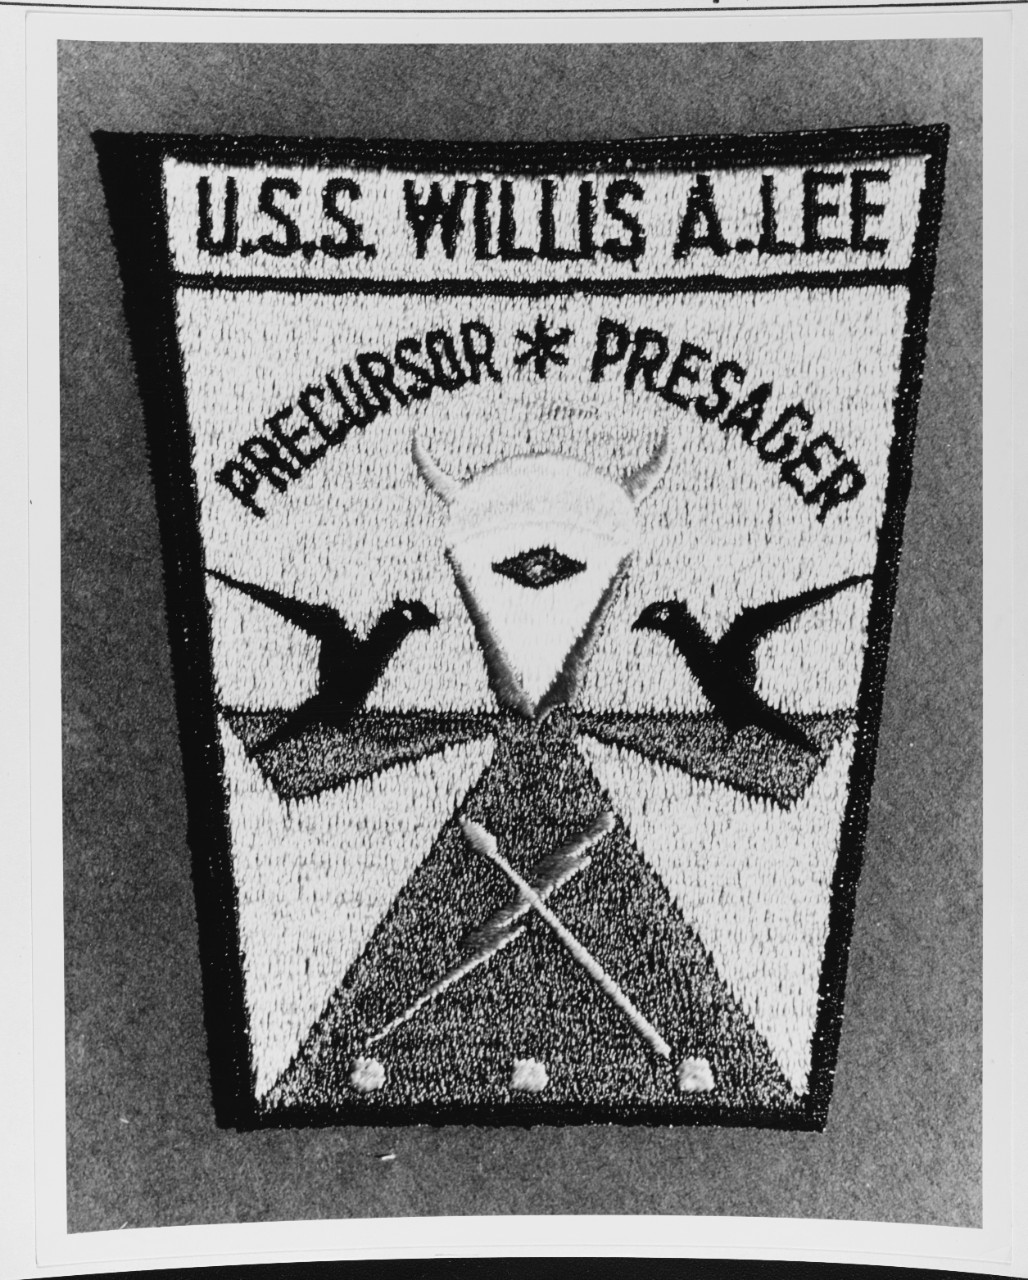 Insignia:  USS WILLIS A. LEE (DL-4)